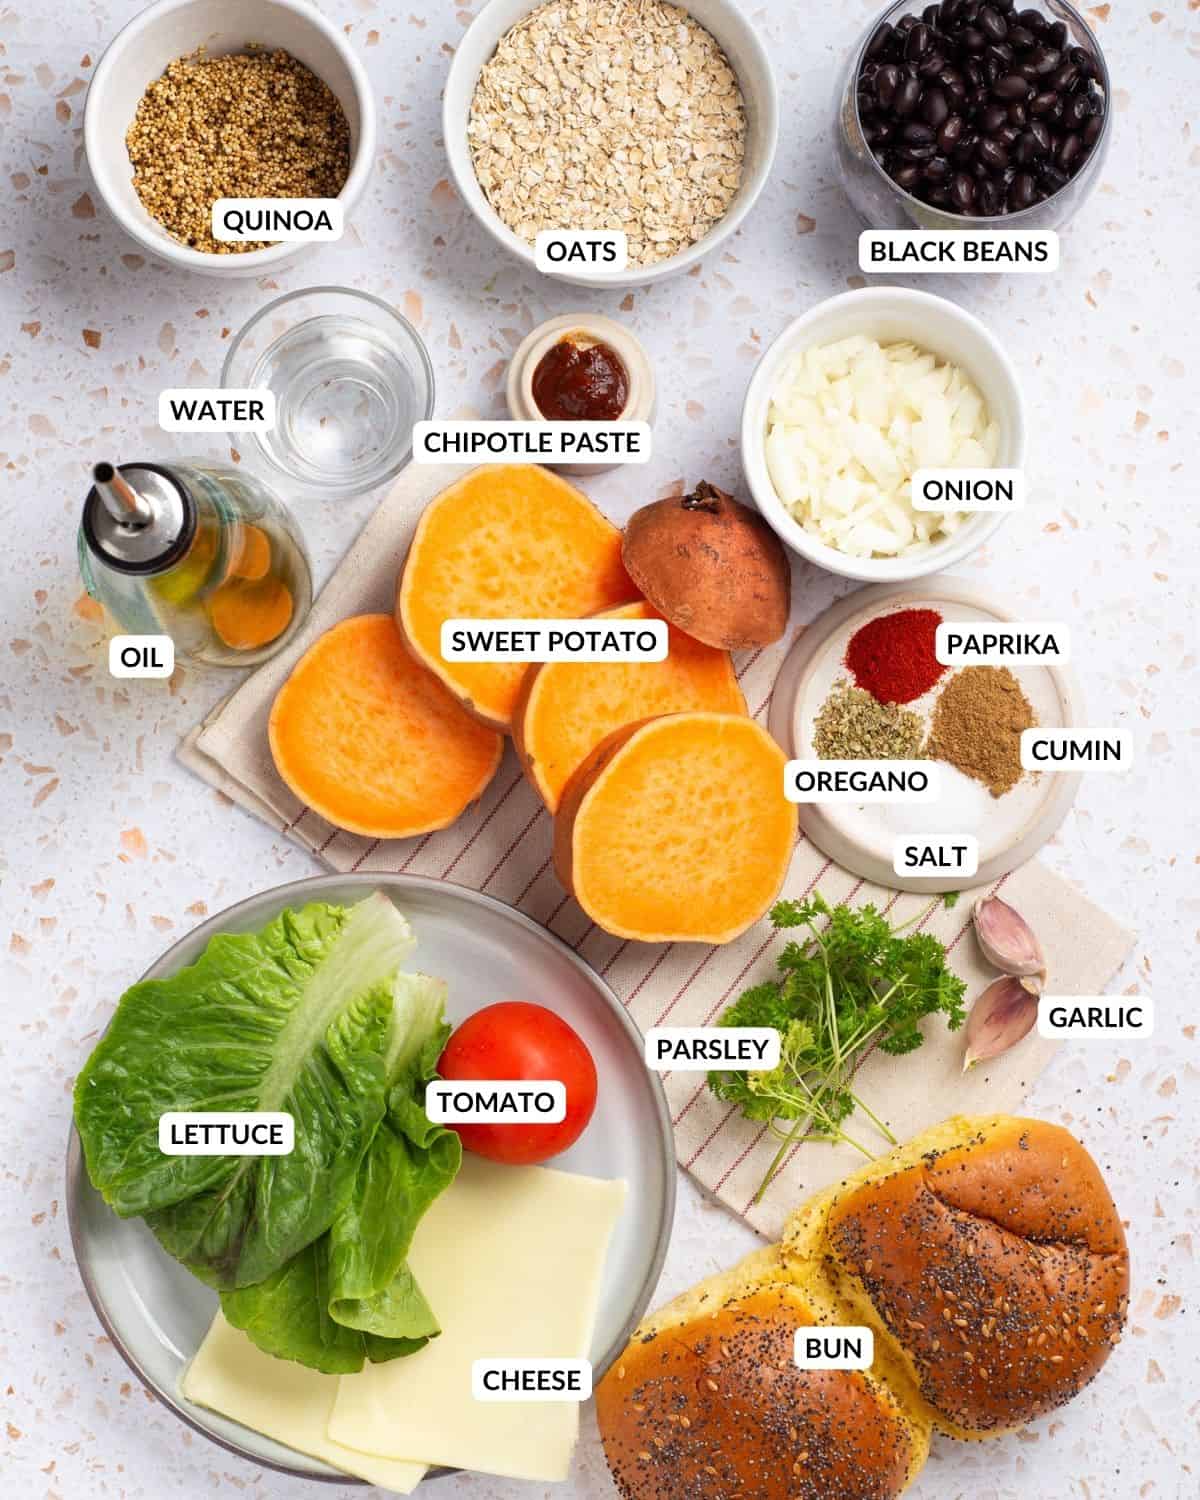 Overhead image of ingredients needed for the recipe, labeled 